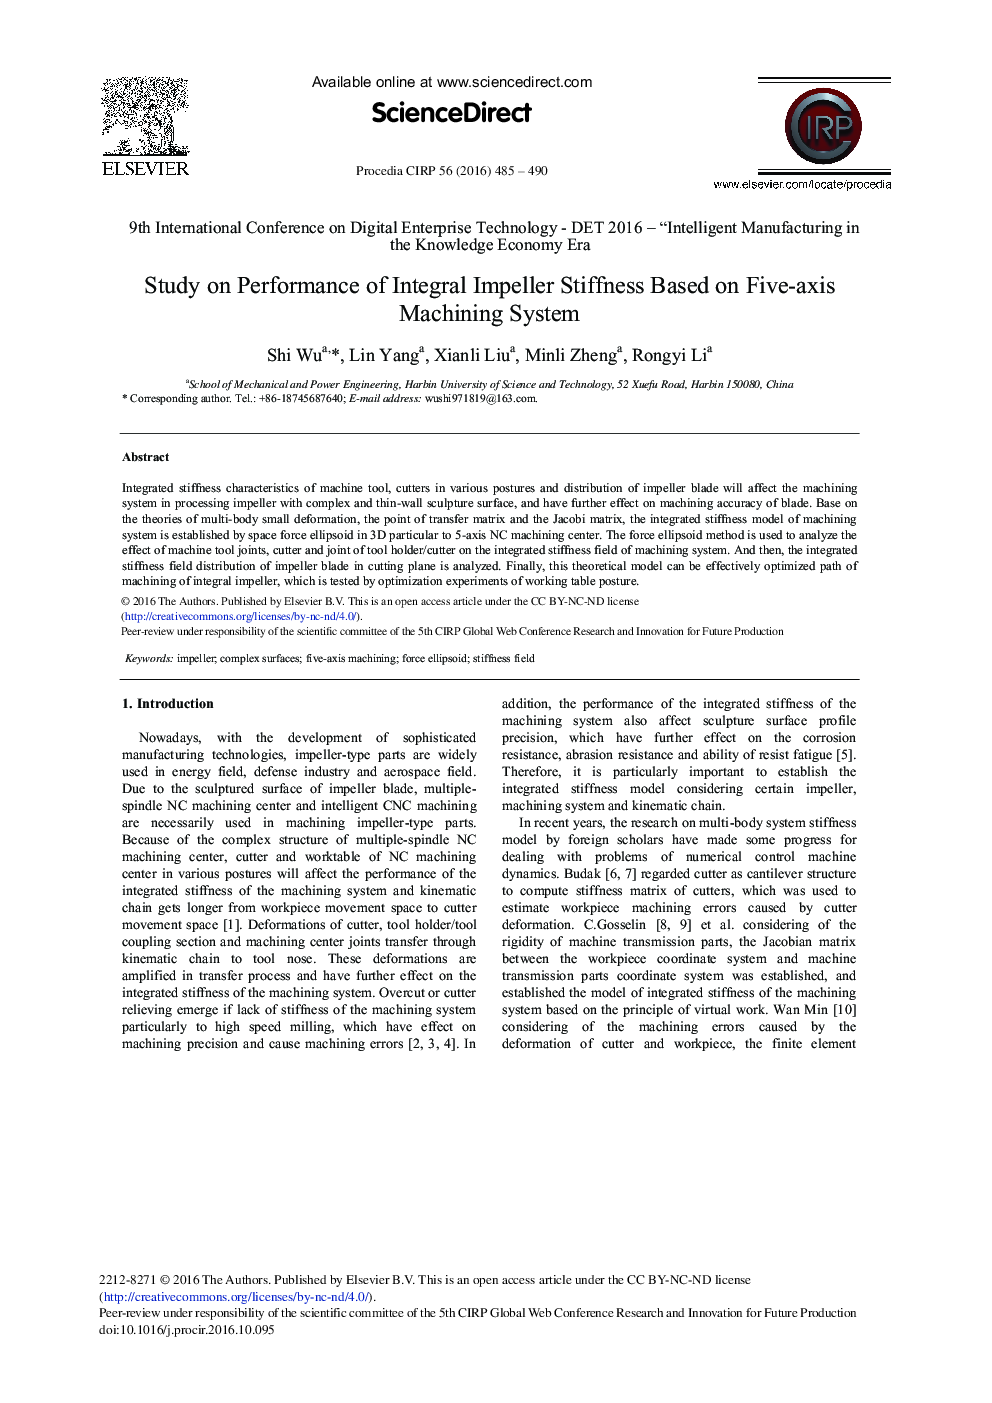 Study on Performance of Integral Impeller Stiffness Based on Five-axis Machining System